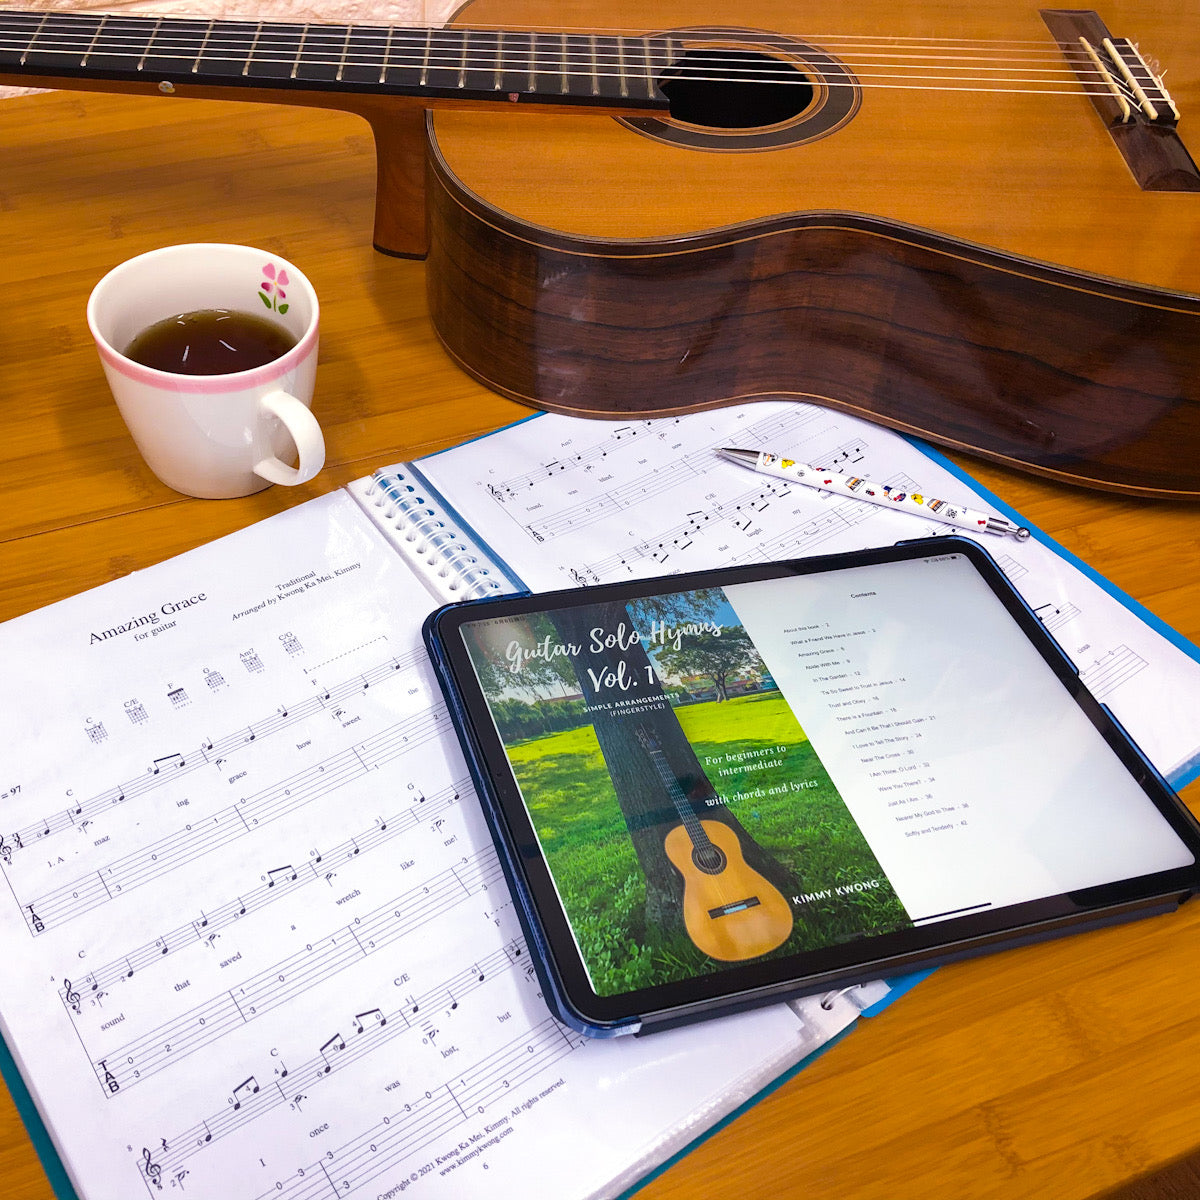 Guitar Solo Hymns eBook Vol.1 - Is Available Now!